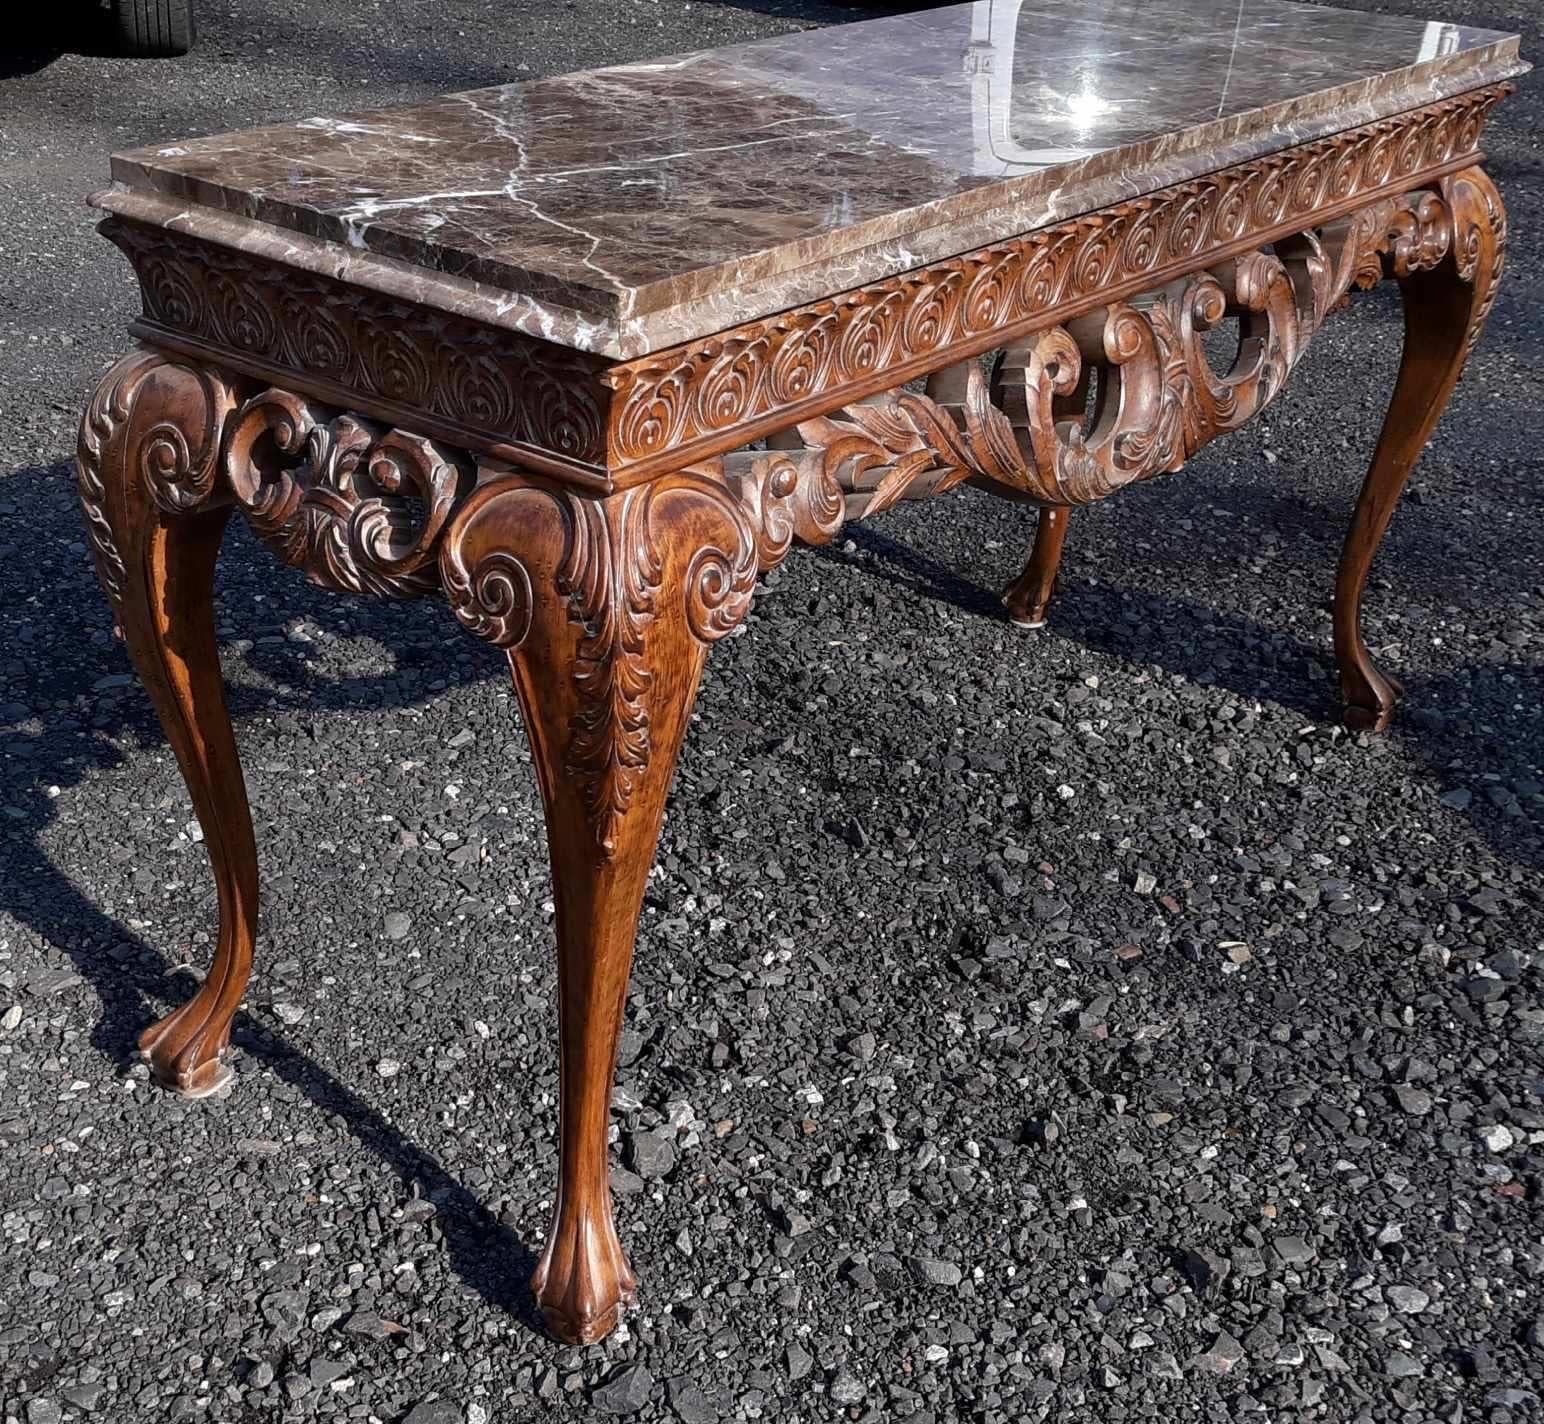 Elegant hand carved walnut and marble console table.  The elaborately carved base with reticulated apron supported buy four graceful carved cabriole legs.  The top is a thick bronze white and earth tone mpolished marble. 